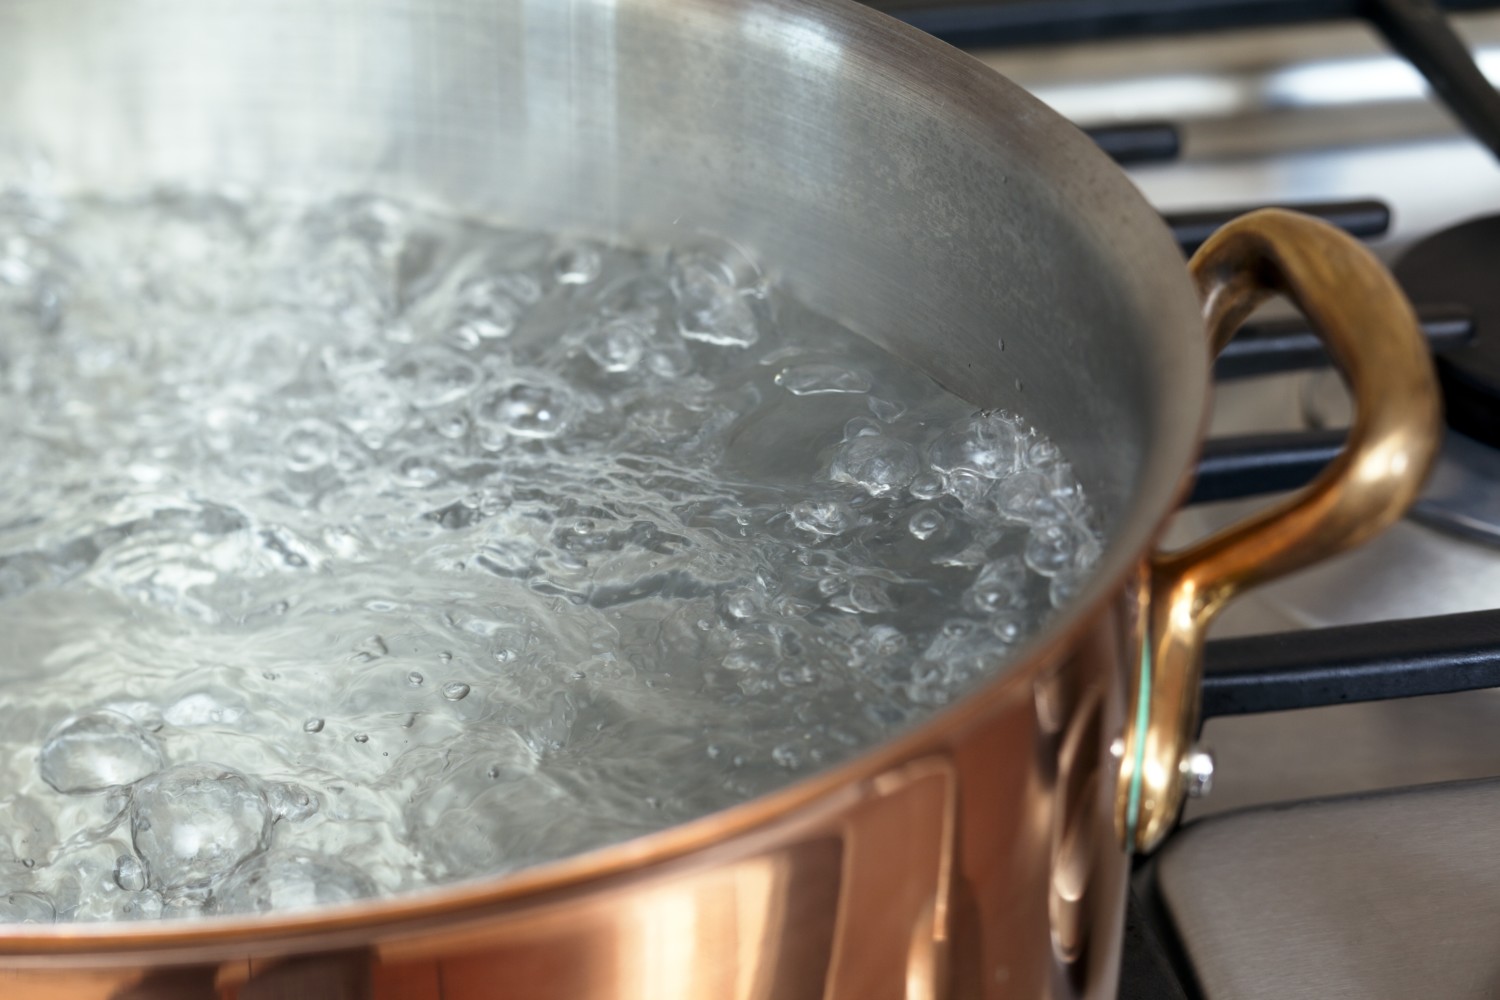 Placing a wooden spoon over a pot of boiling water stops it from boili, Kitchen Hacks